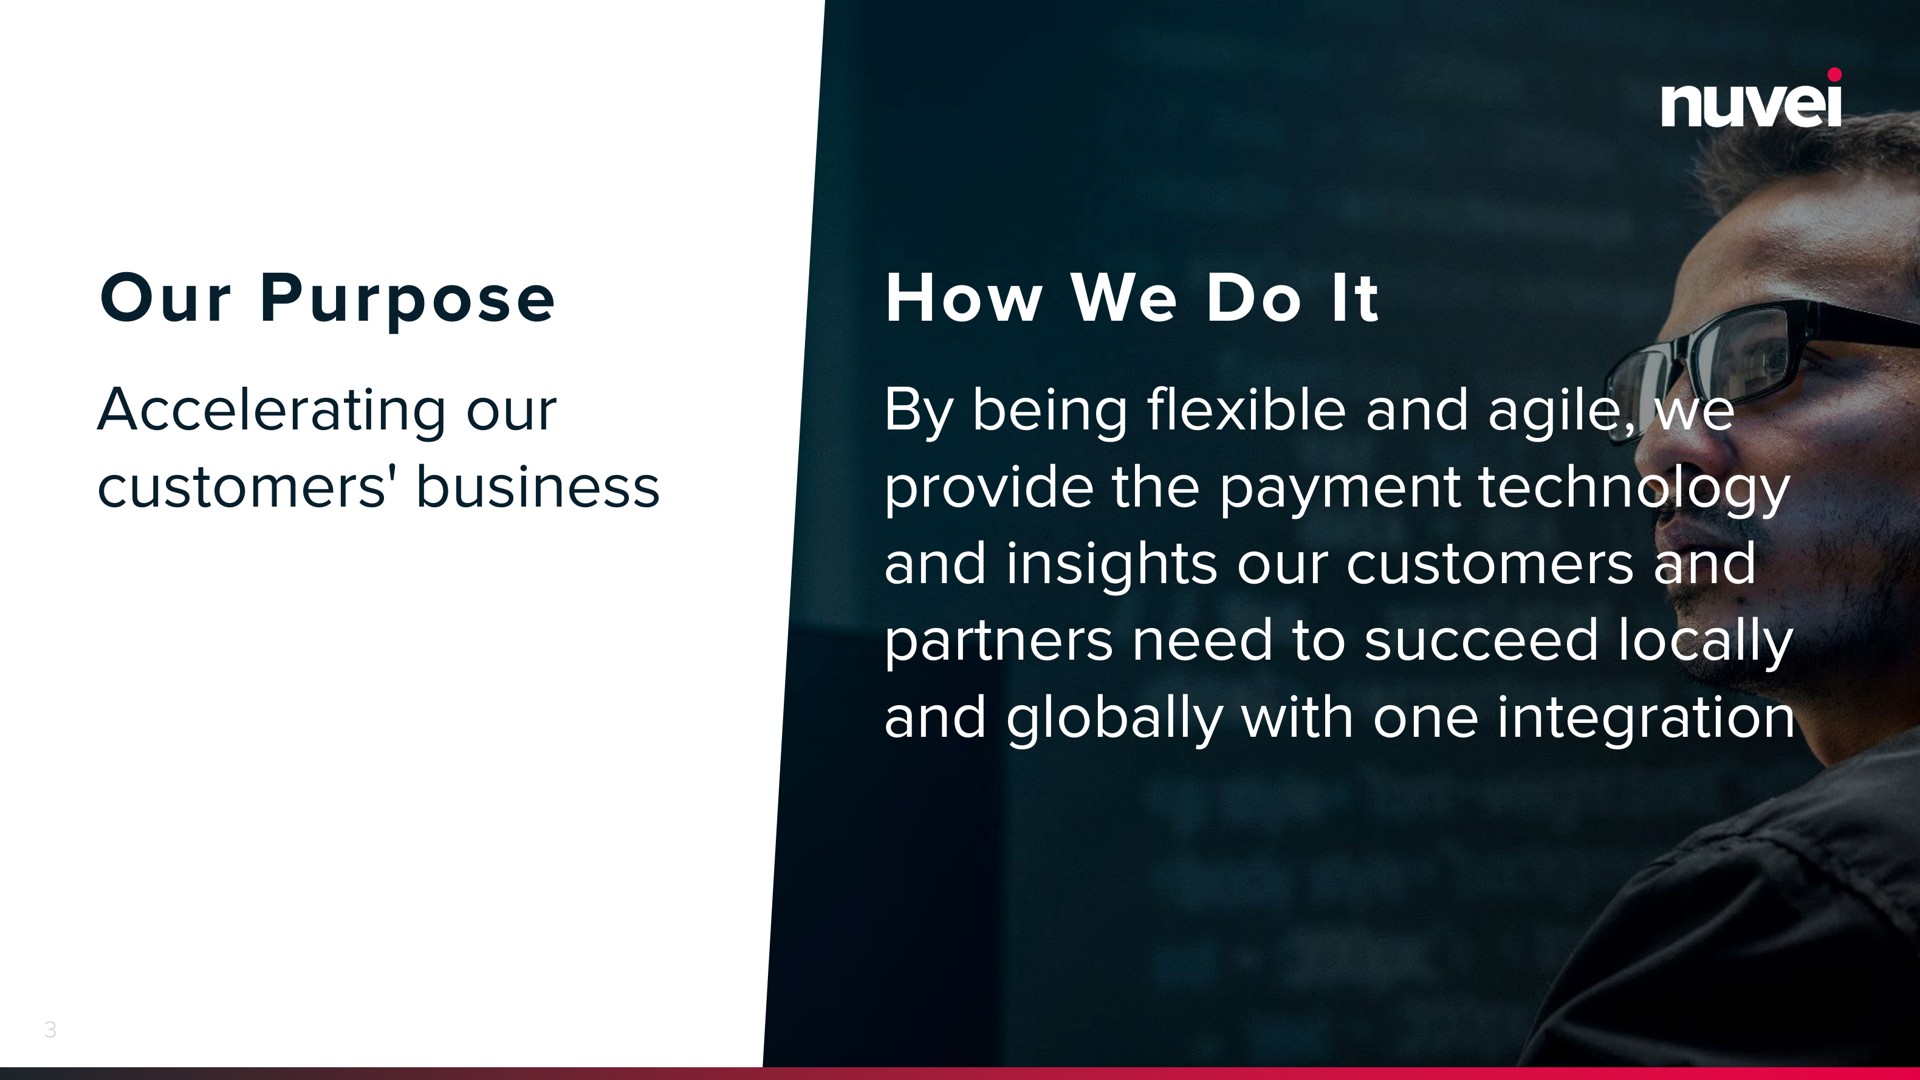 our purpose how we do it accelerating our customers business by being flexible and agile we provide the payment technology and insights our customers and partners need to succeed locally and globally with one integration | Nuvei